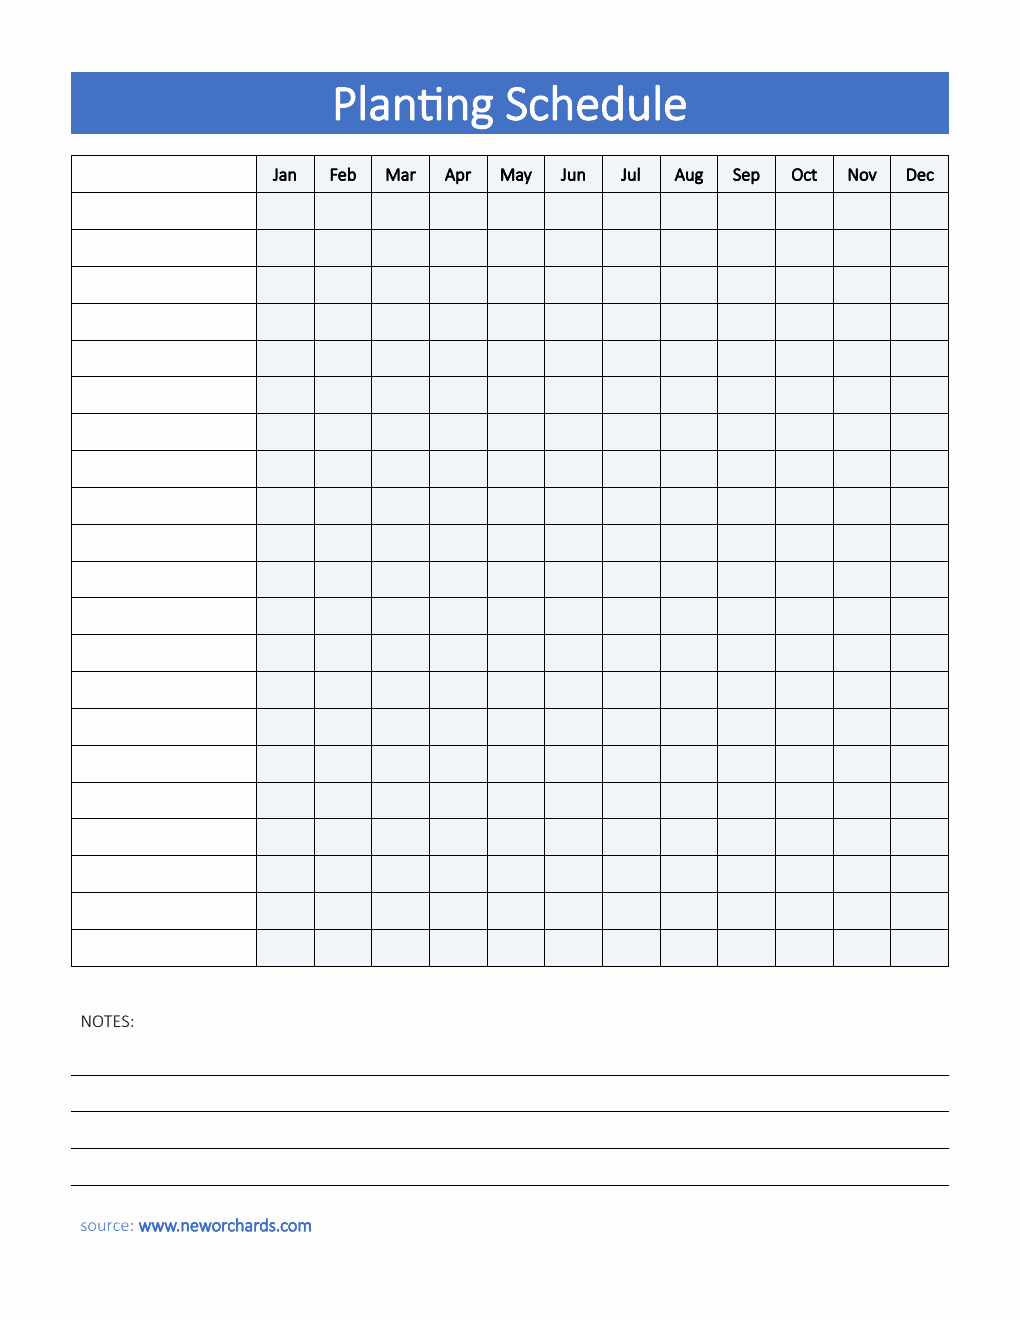  Planting Schedule Template - Word